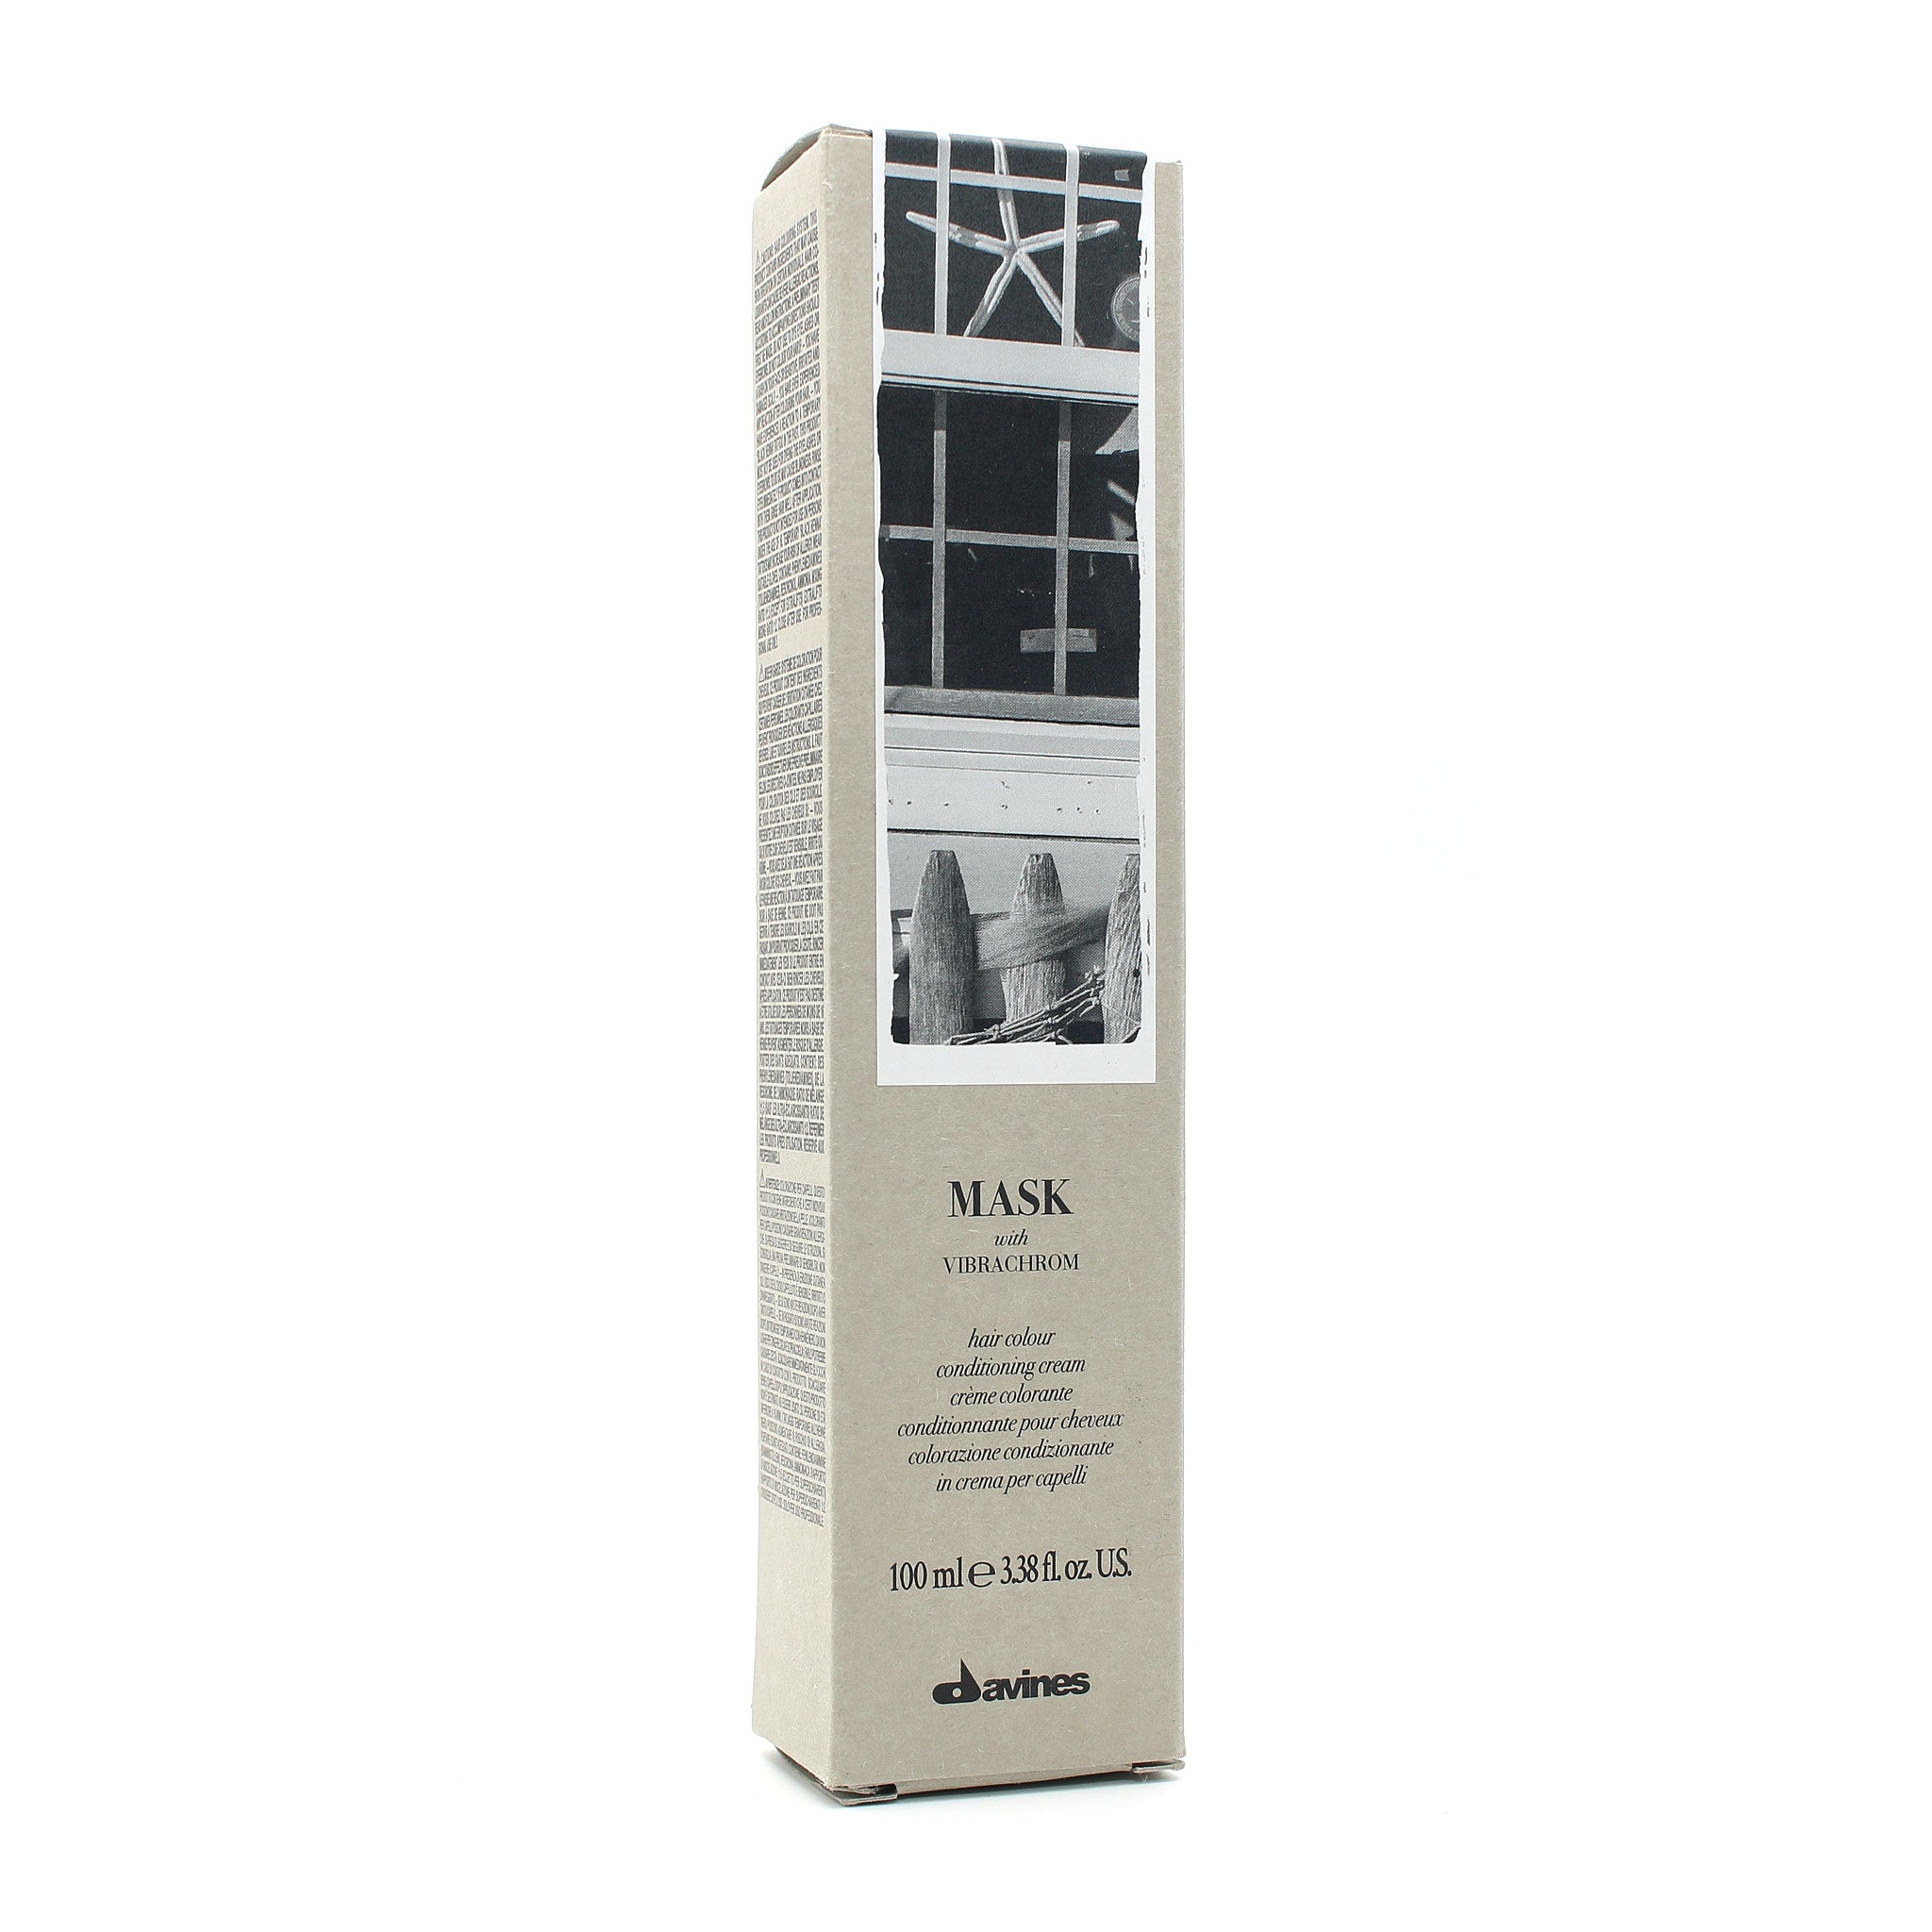 DAVINES Mask with Vibracrom 12,11 Hair Color Conditioning Cream 3.38 oz